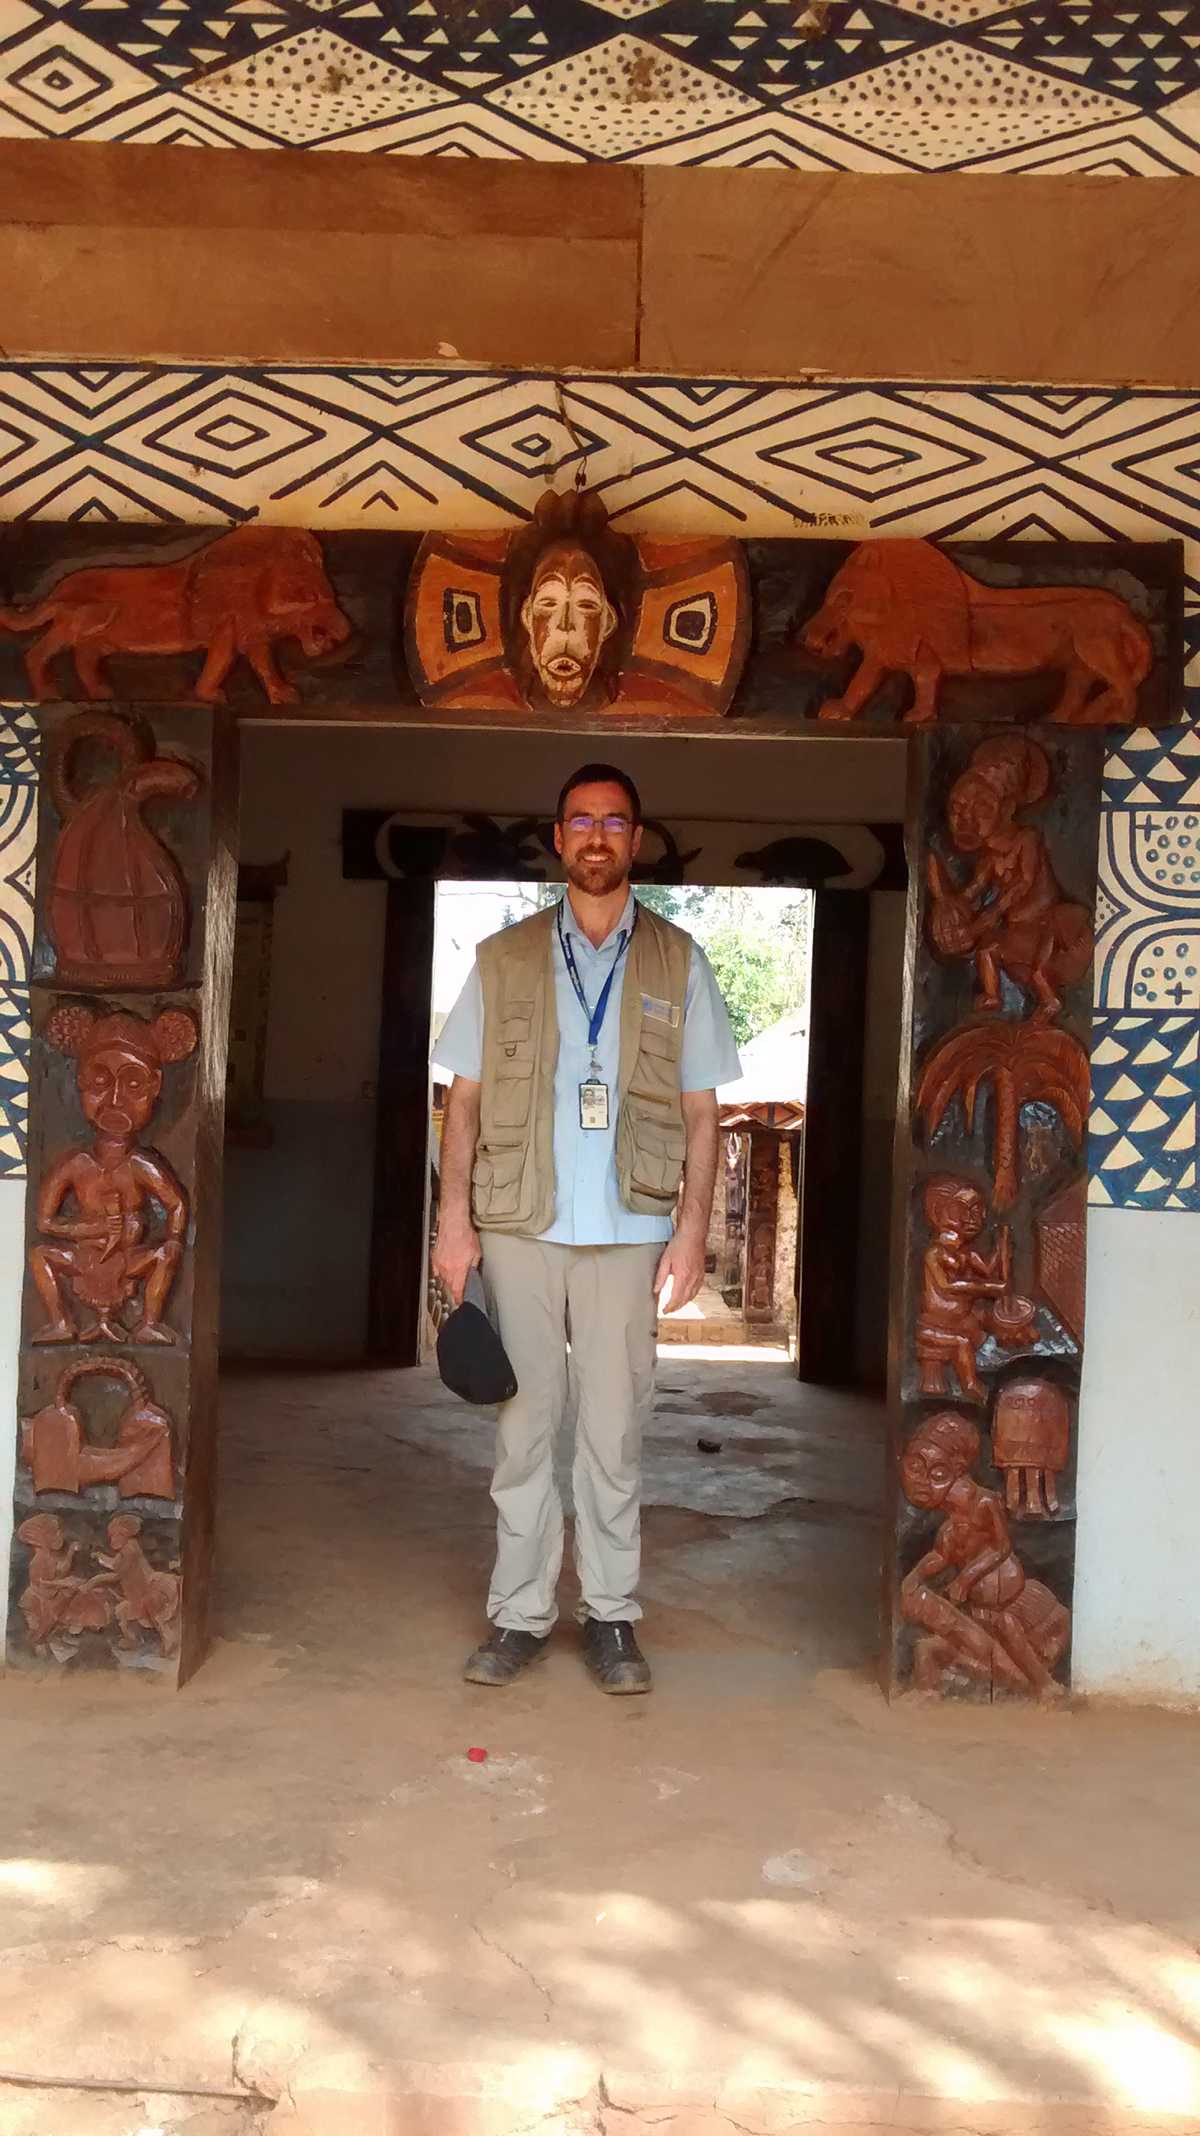 Cameroon: Dr. Louie Rosencrans from CDC’s Global Immunization Division at the local chief’s palace on his way back from supervising a polio immunization campaign, Centre region, Cameroon.